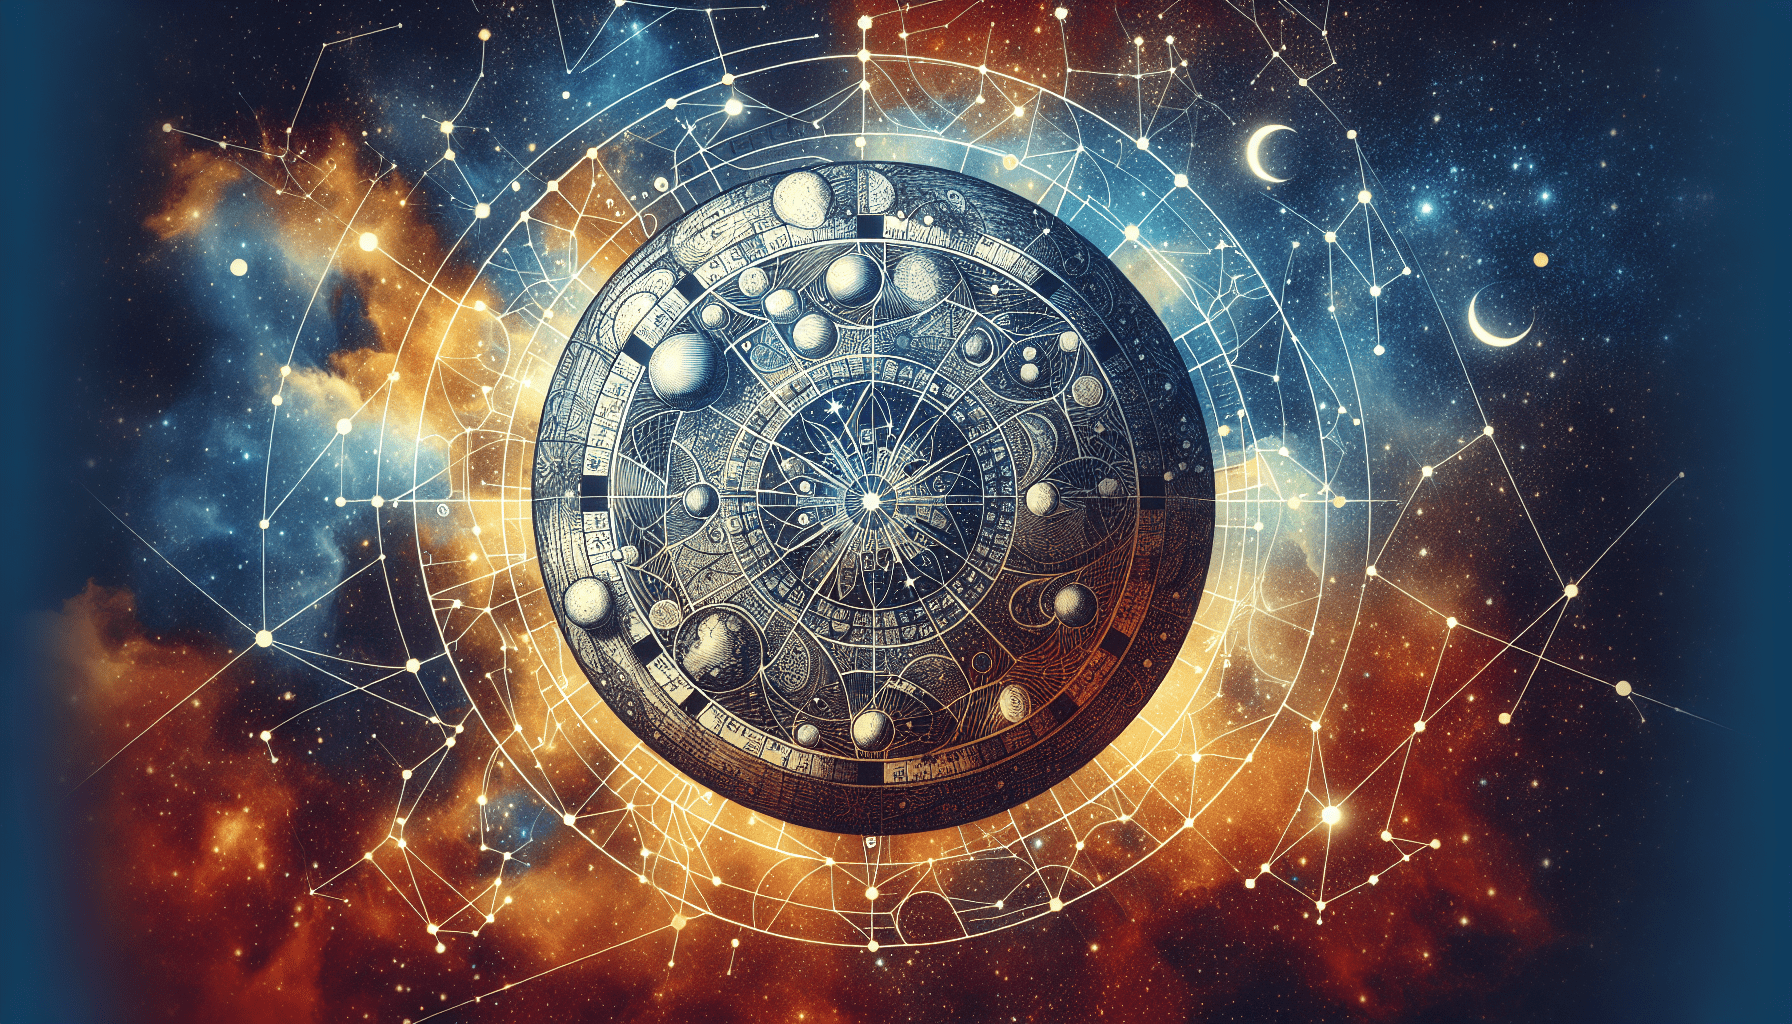 What Is The Purpose Of Astrologer?